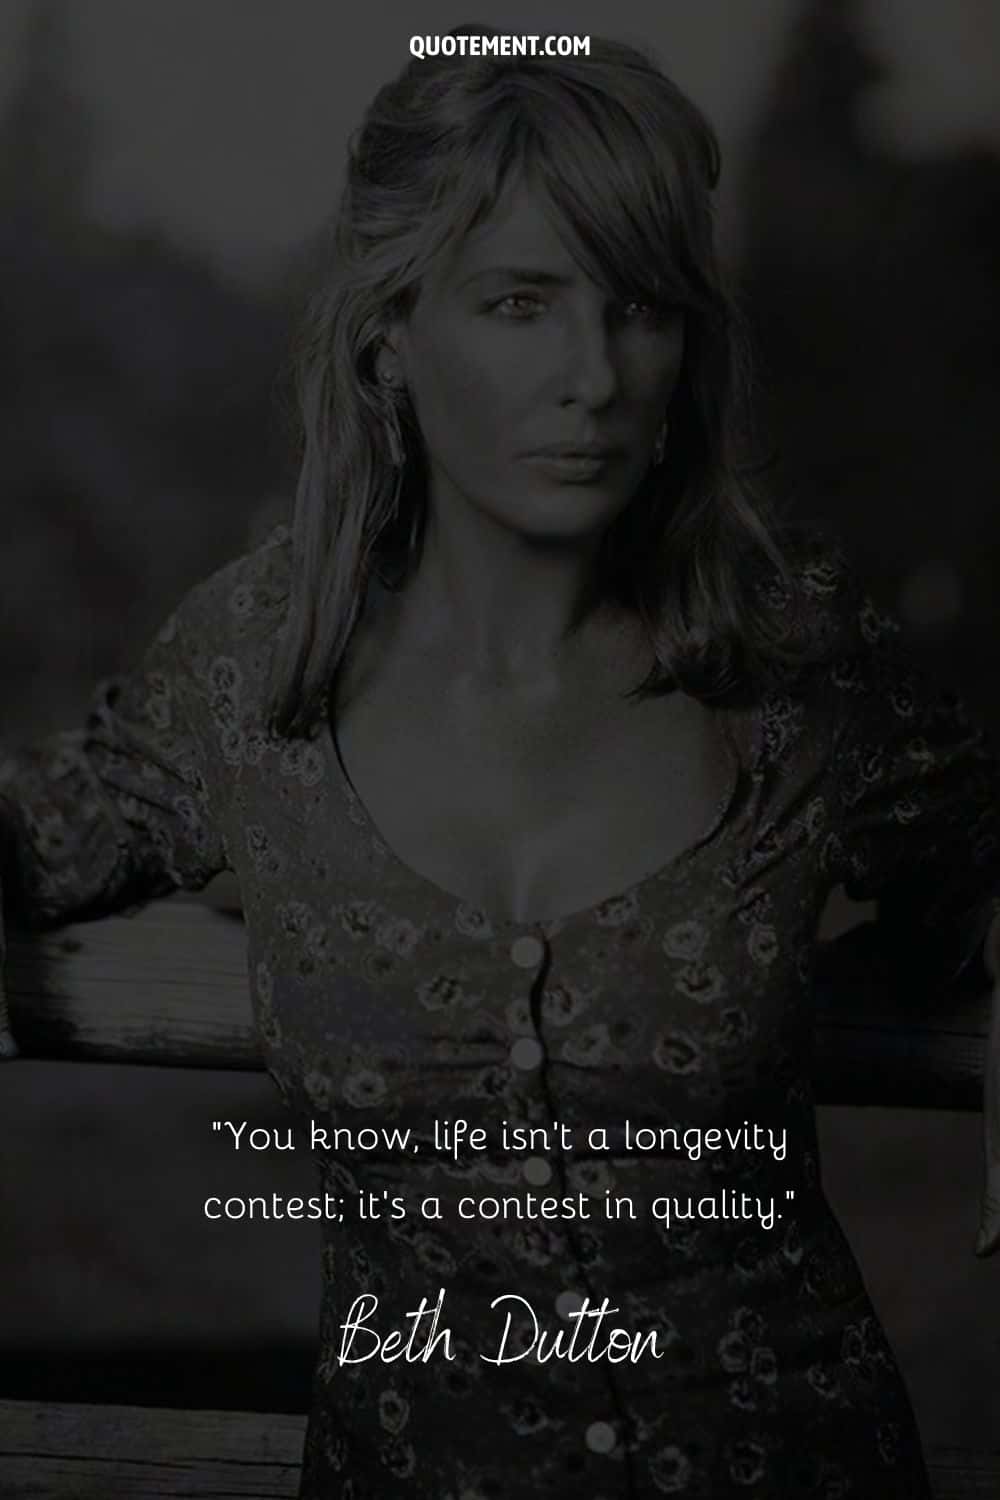 attractive Beth Dutton posing representing wise quote by Beth Dutton